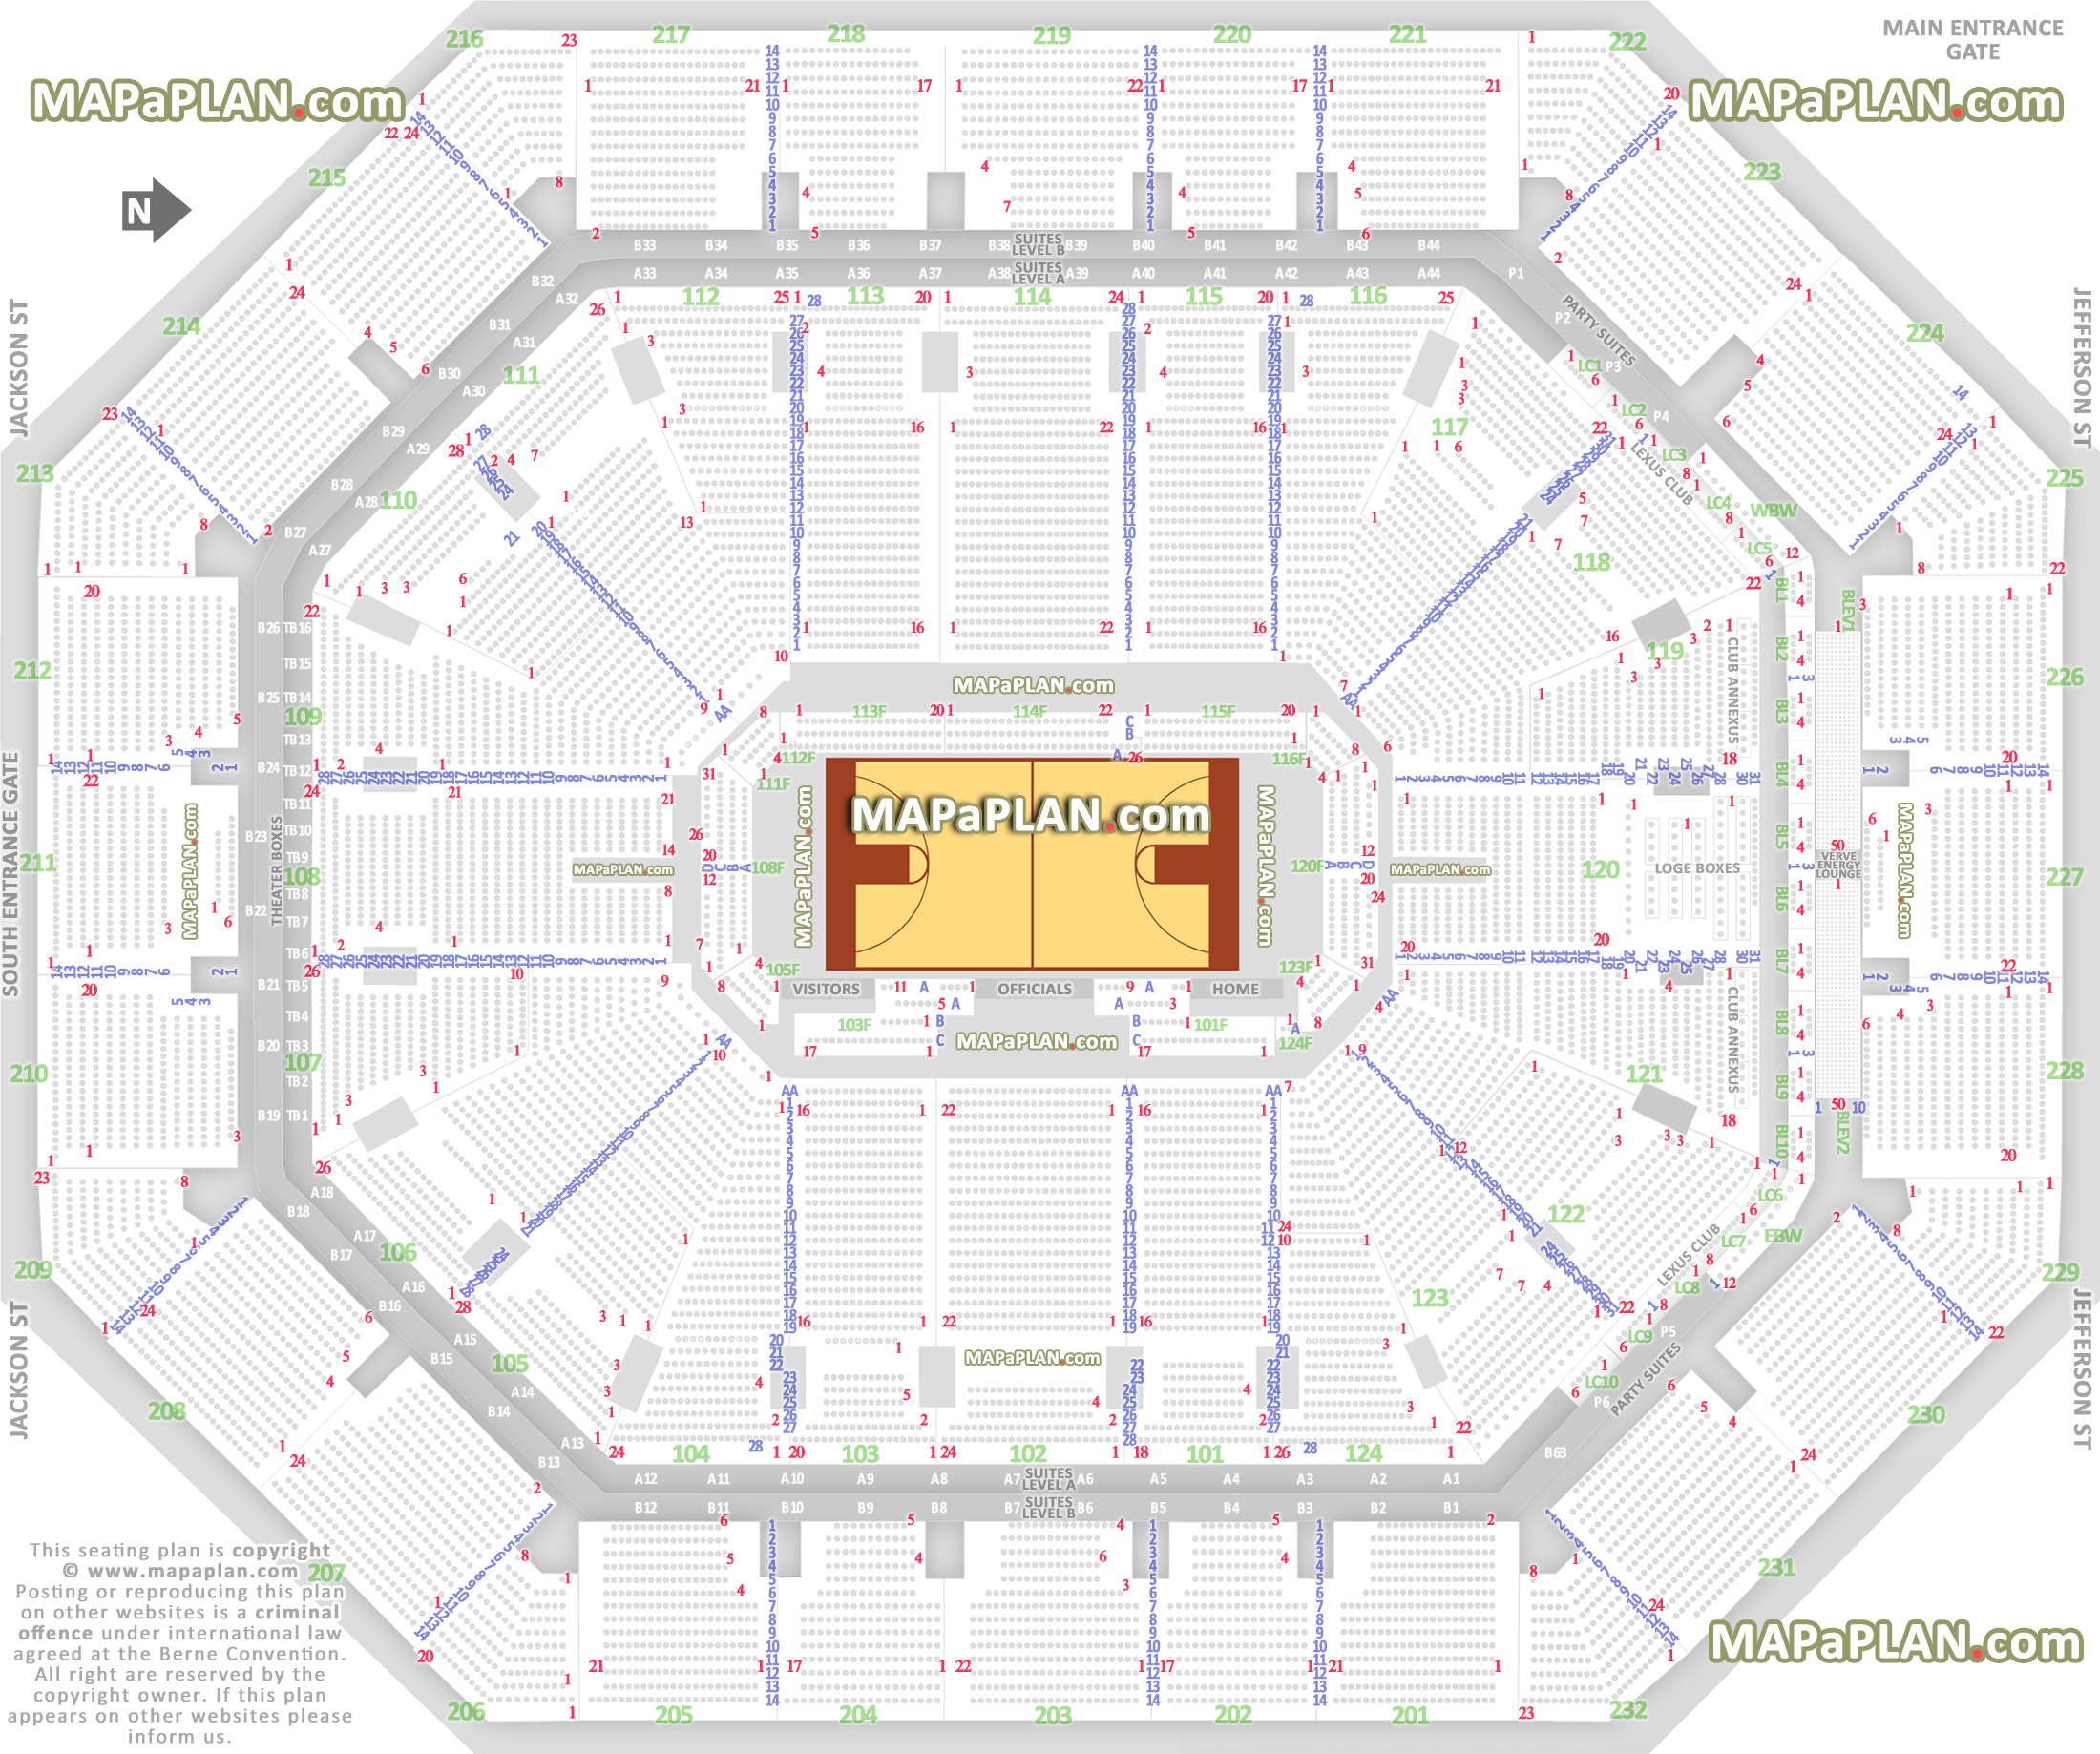 suns nba game stadium individual find my seat locator how seats rows numbered loge boxes annexus lexus club private party suites Phoenix Talking Stick Resort Arena seating chart